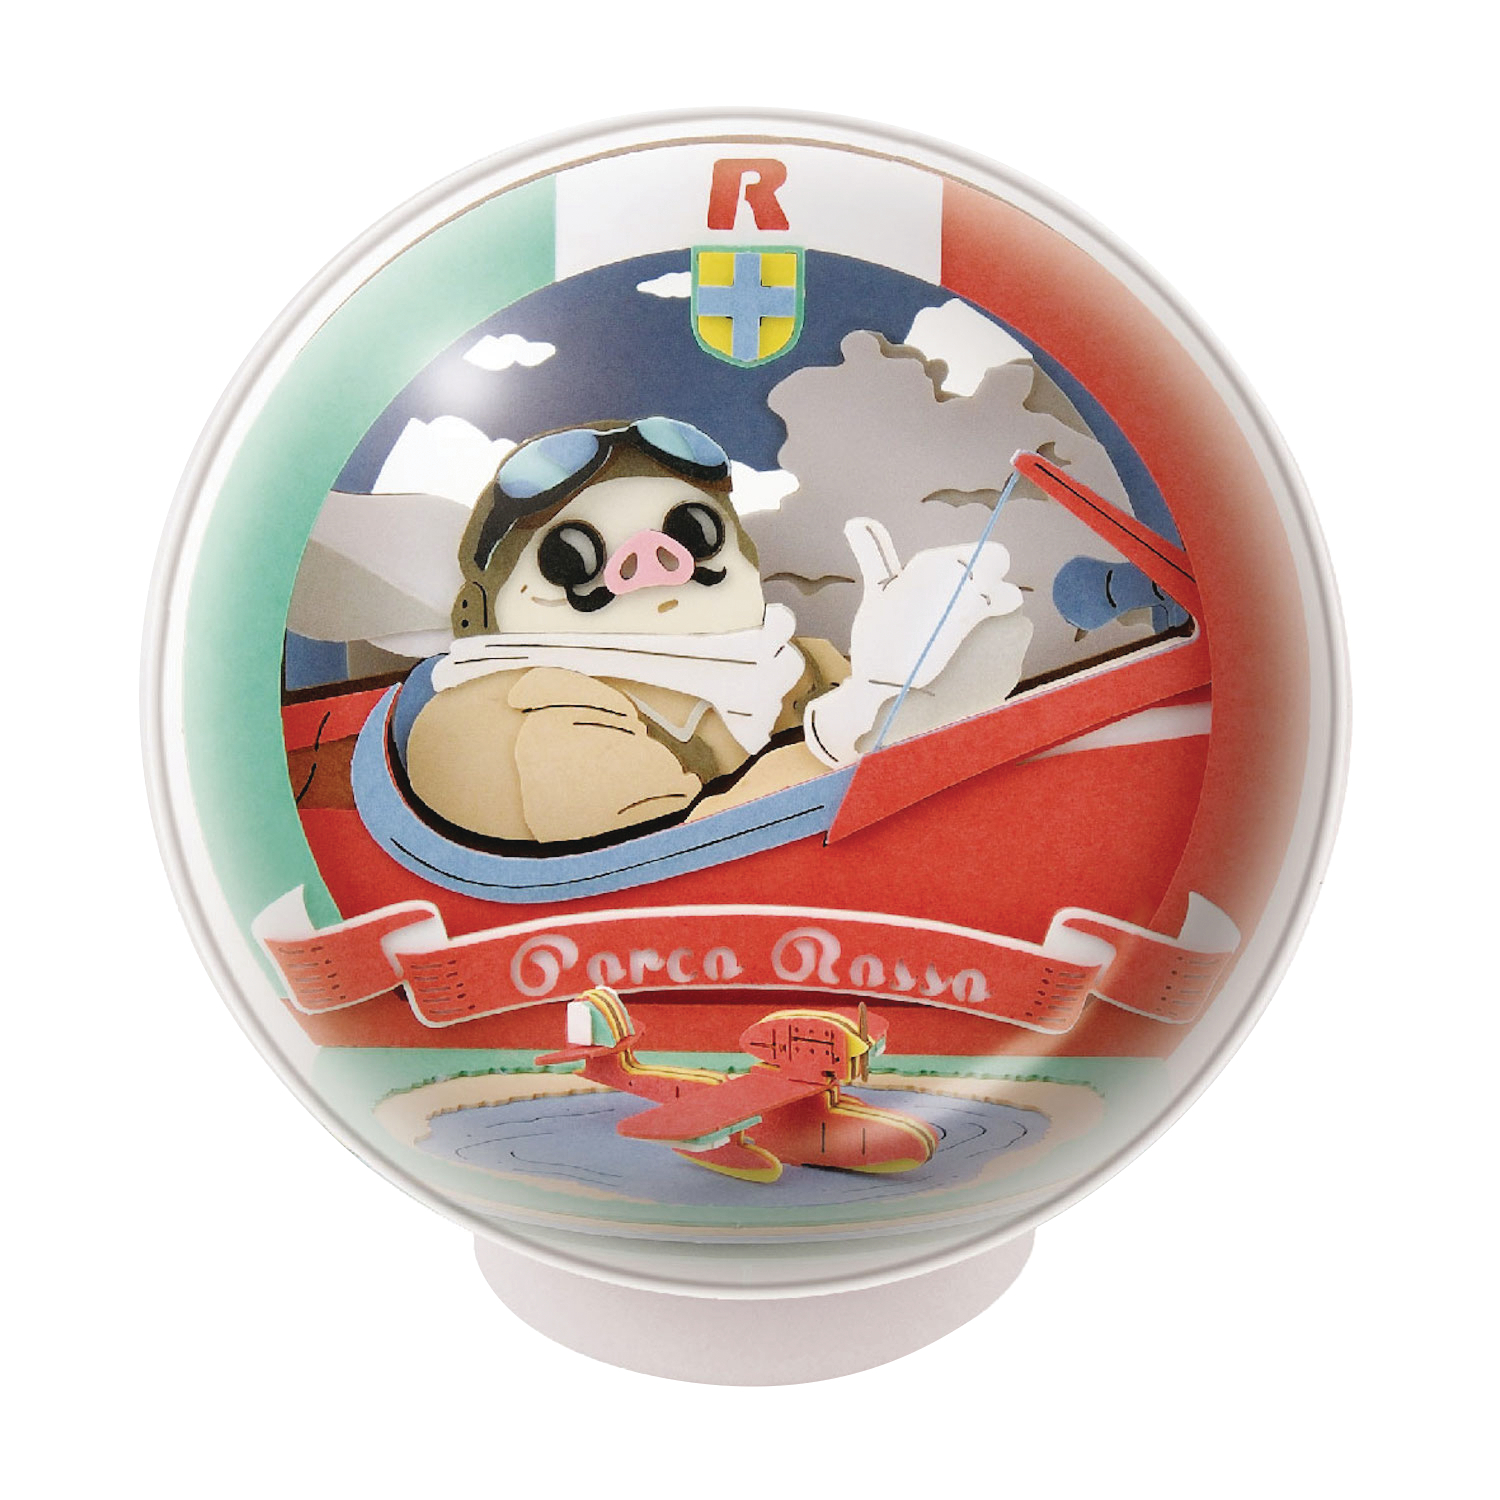 Ghibli Porco Rosso Airplane Piloting Paper Theater Ball